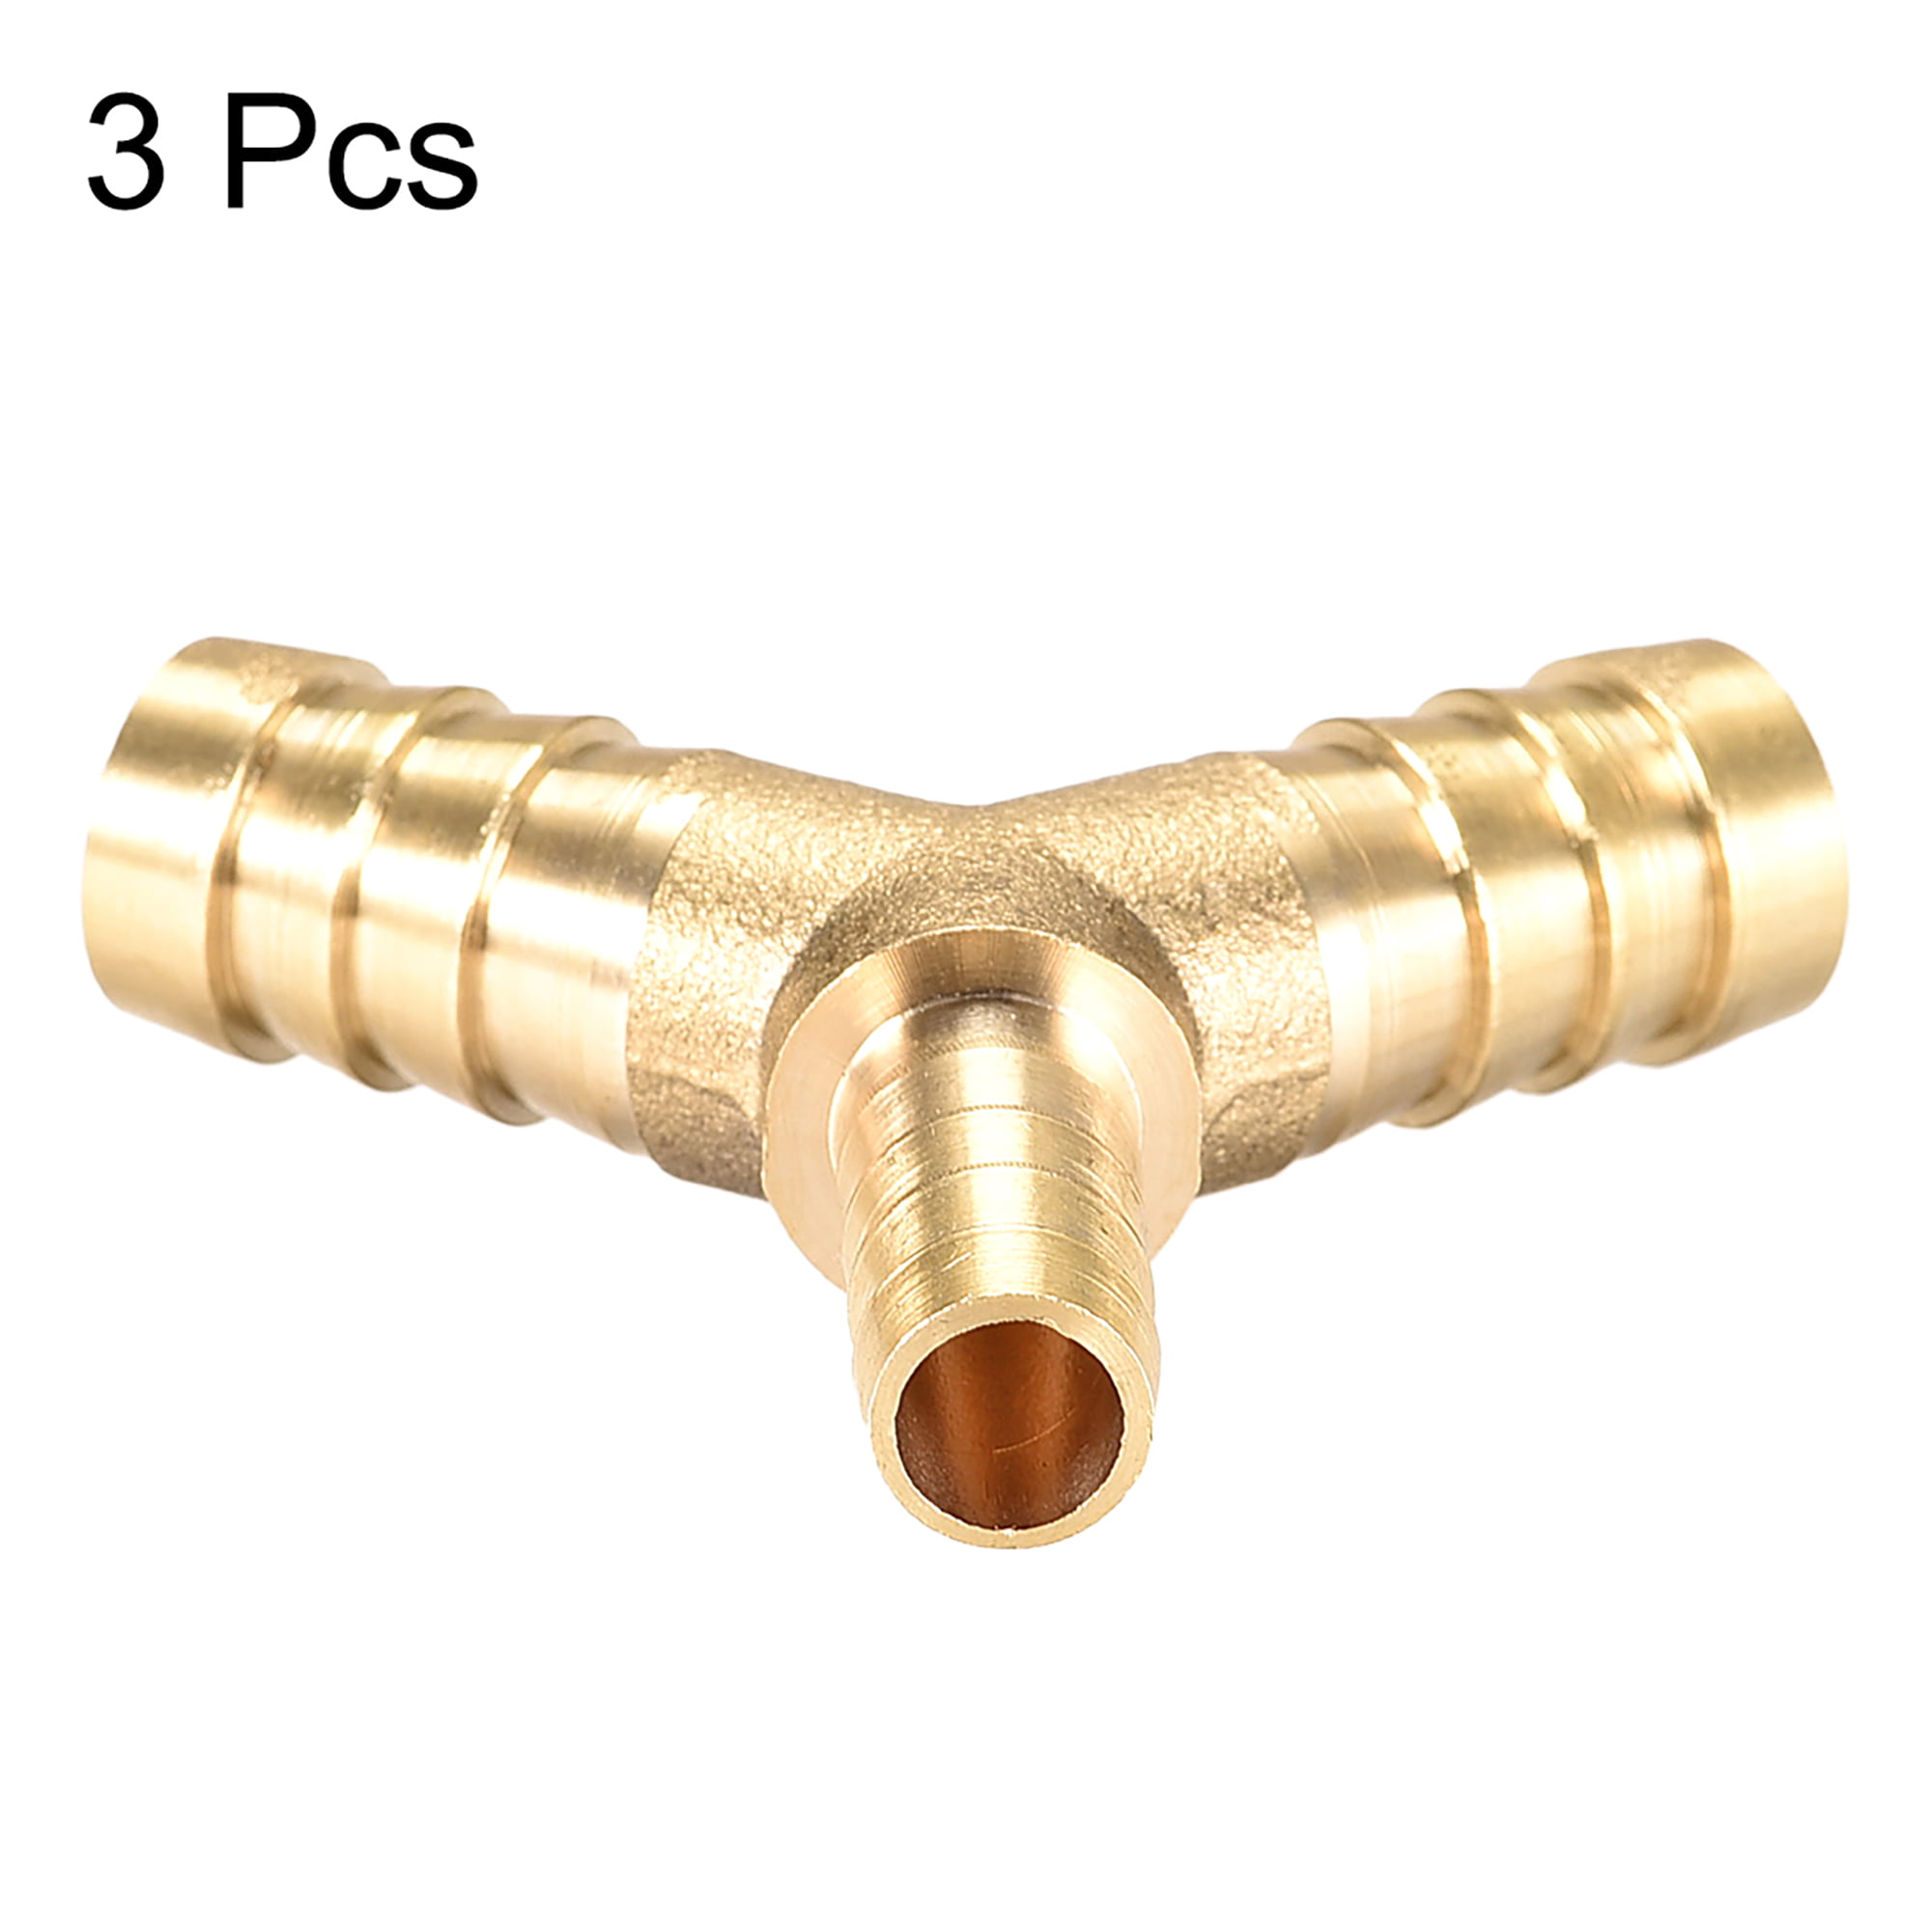 3pcs 12X8X12mm Hose ID Brass Reducer Barb Fitting Y-Shaped 3 Way Tee Connector Adapter for air Oil etc Fuel Water 